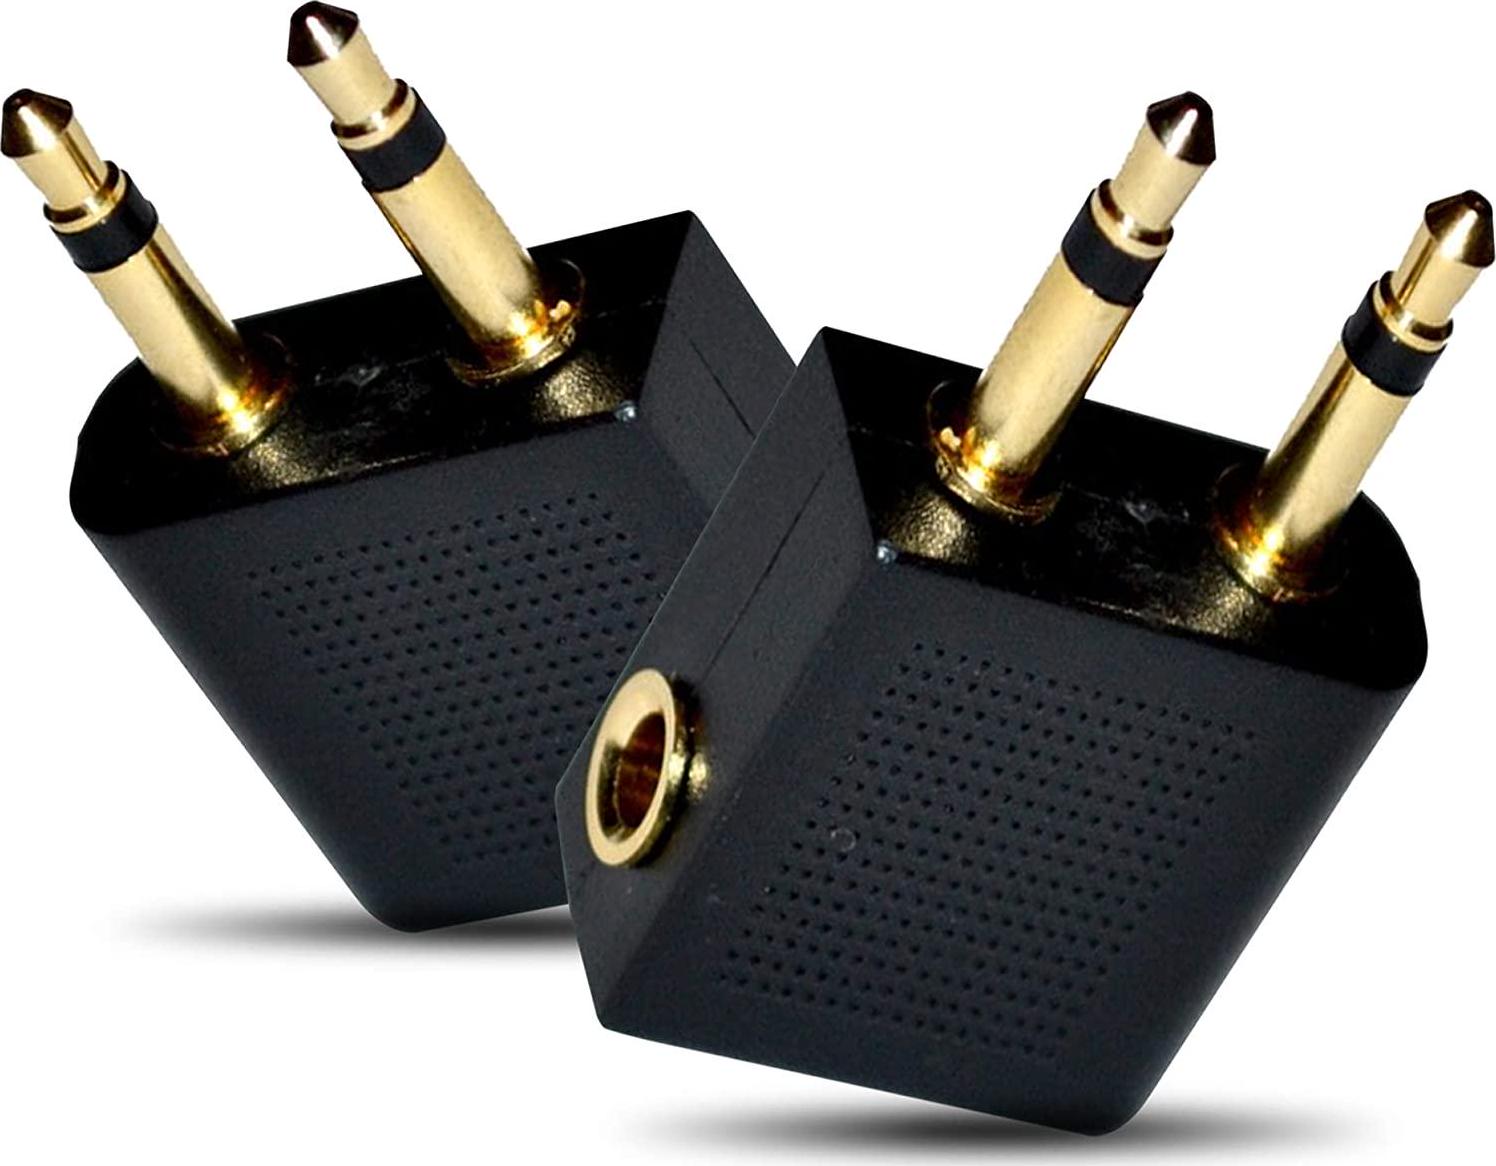 Mobi Lock, Gold Plated Airplane Flight Headphone Adapters (Pack of 2) | Allows You to use Your Earphones with All in-Flight Media Systems | This Airline Plane Headset Converter Enables Great Sound on All Planes